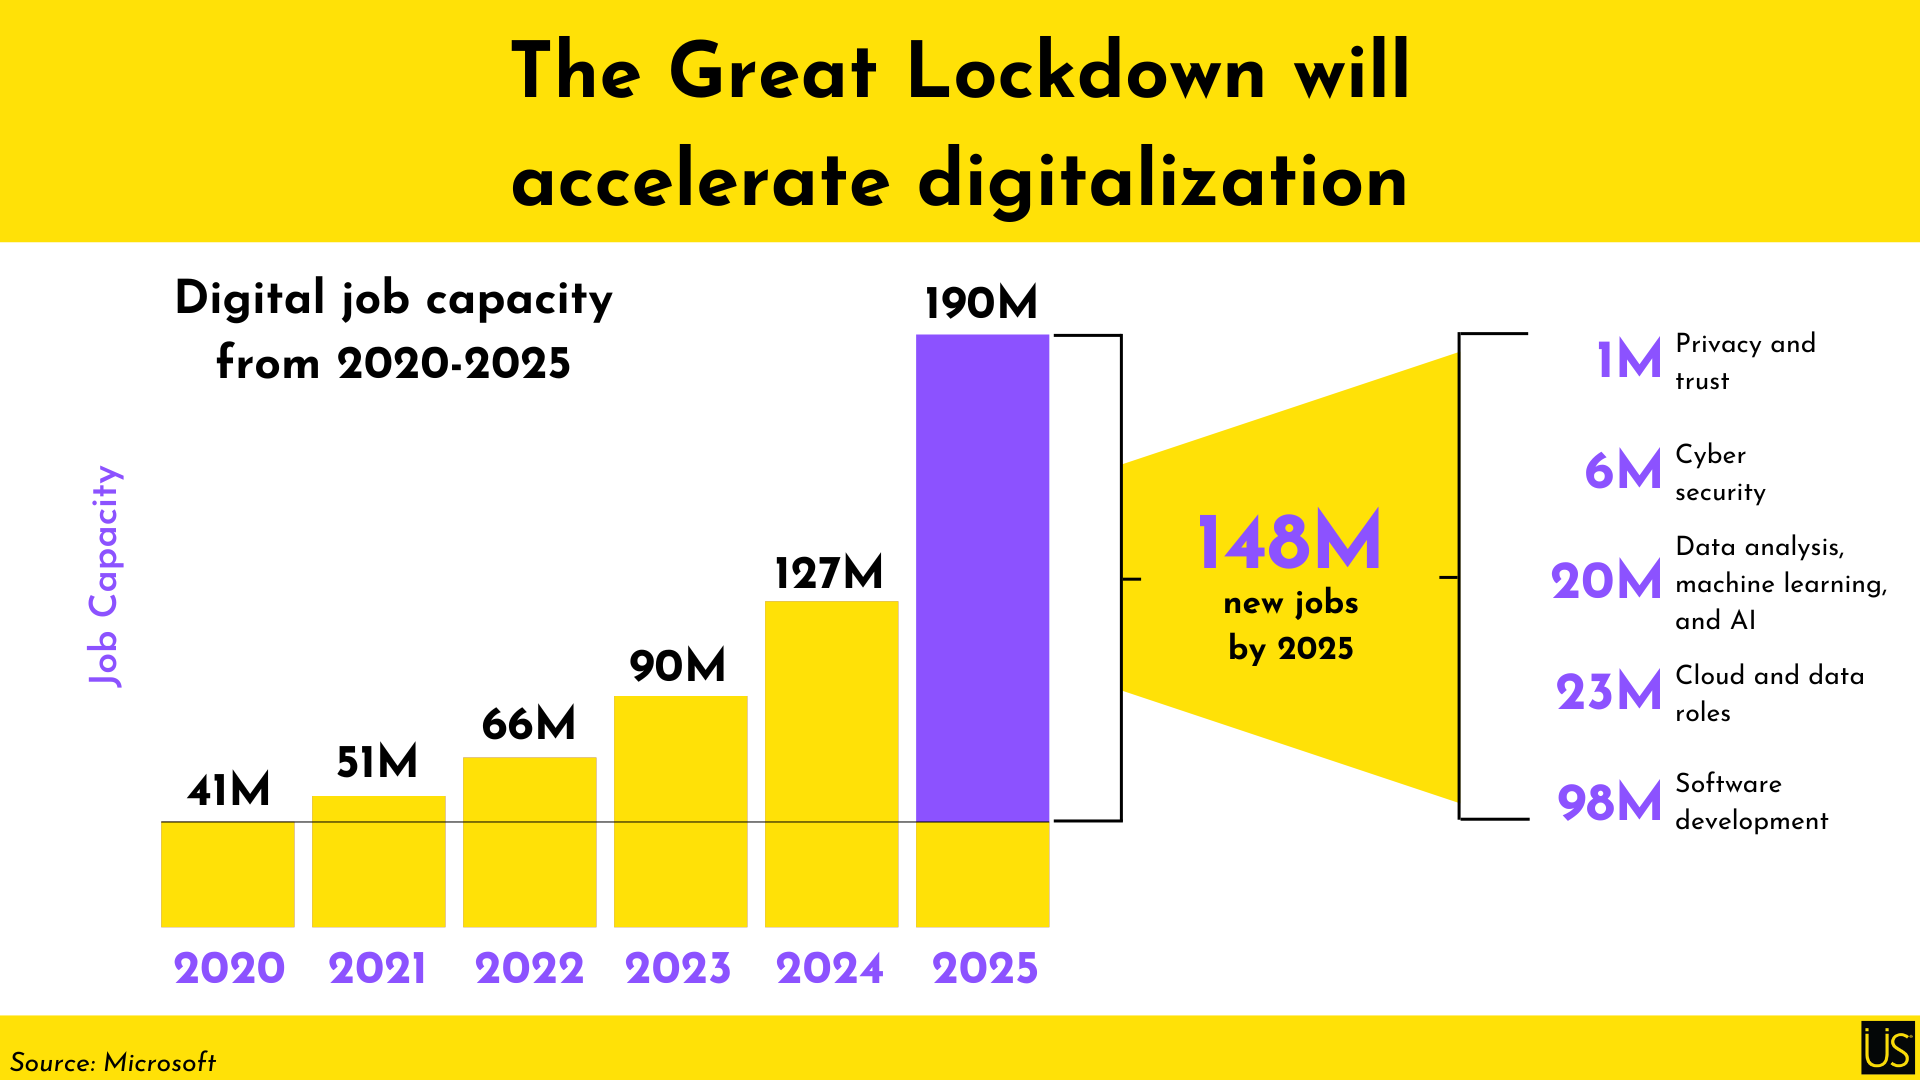 The Great Lockdown graph